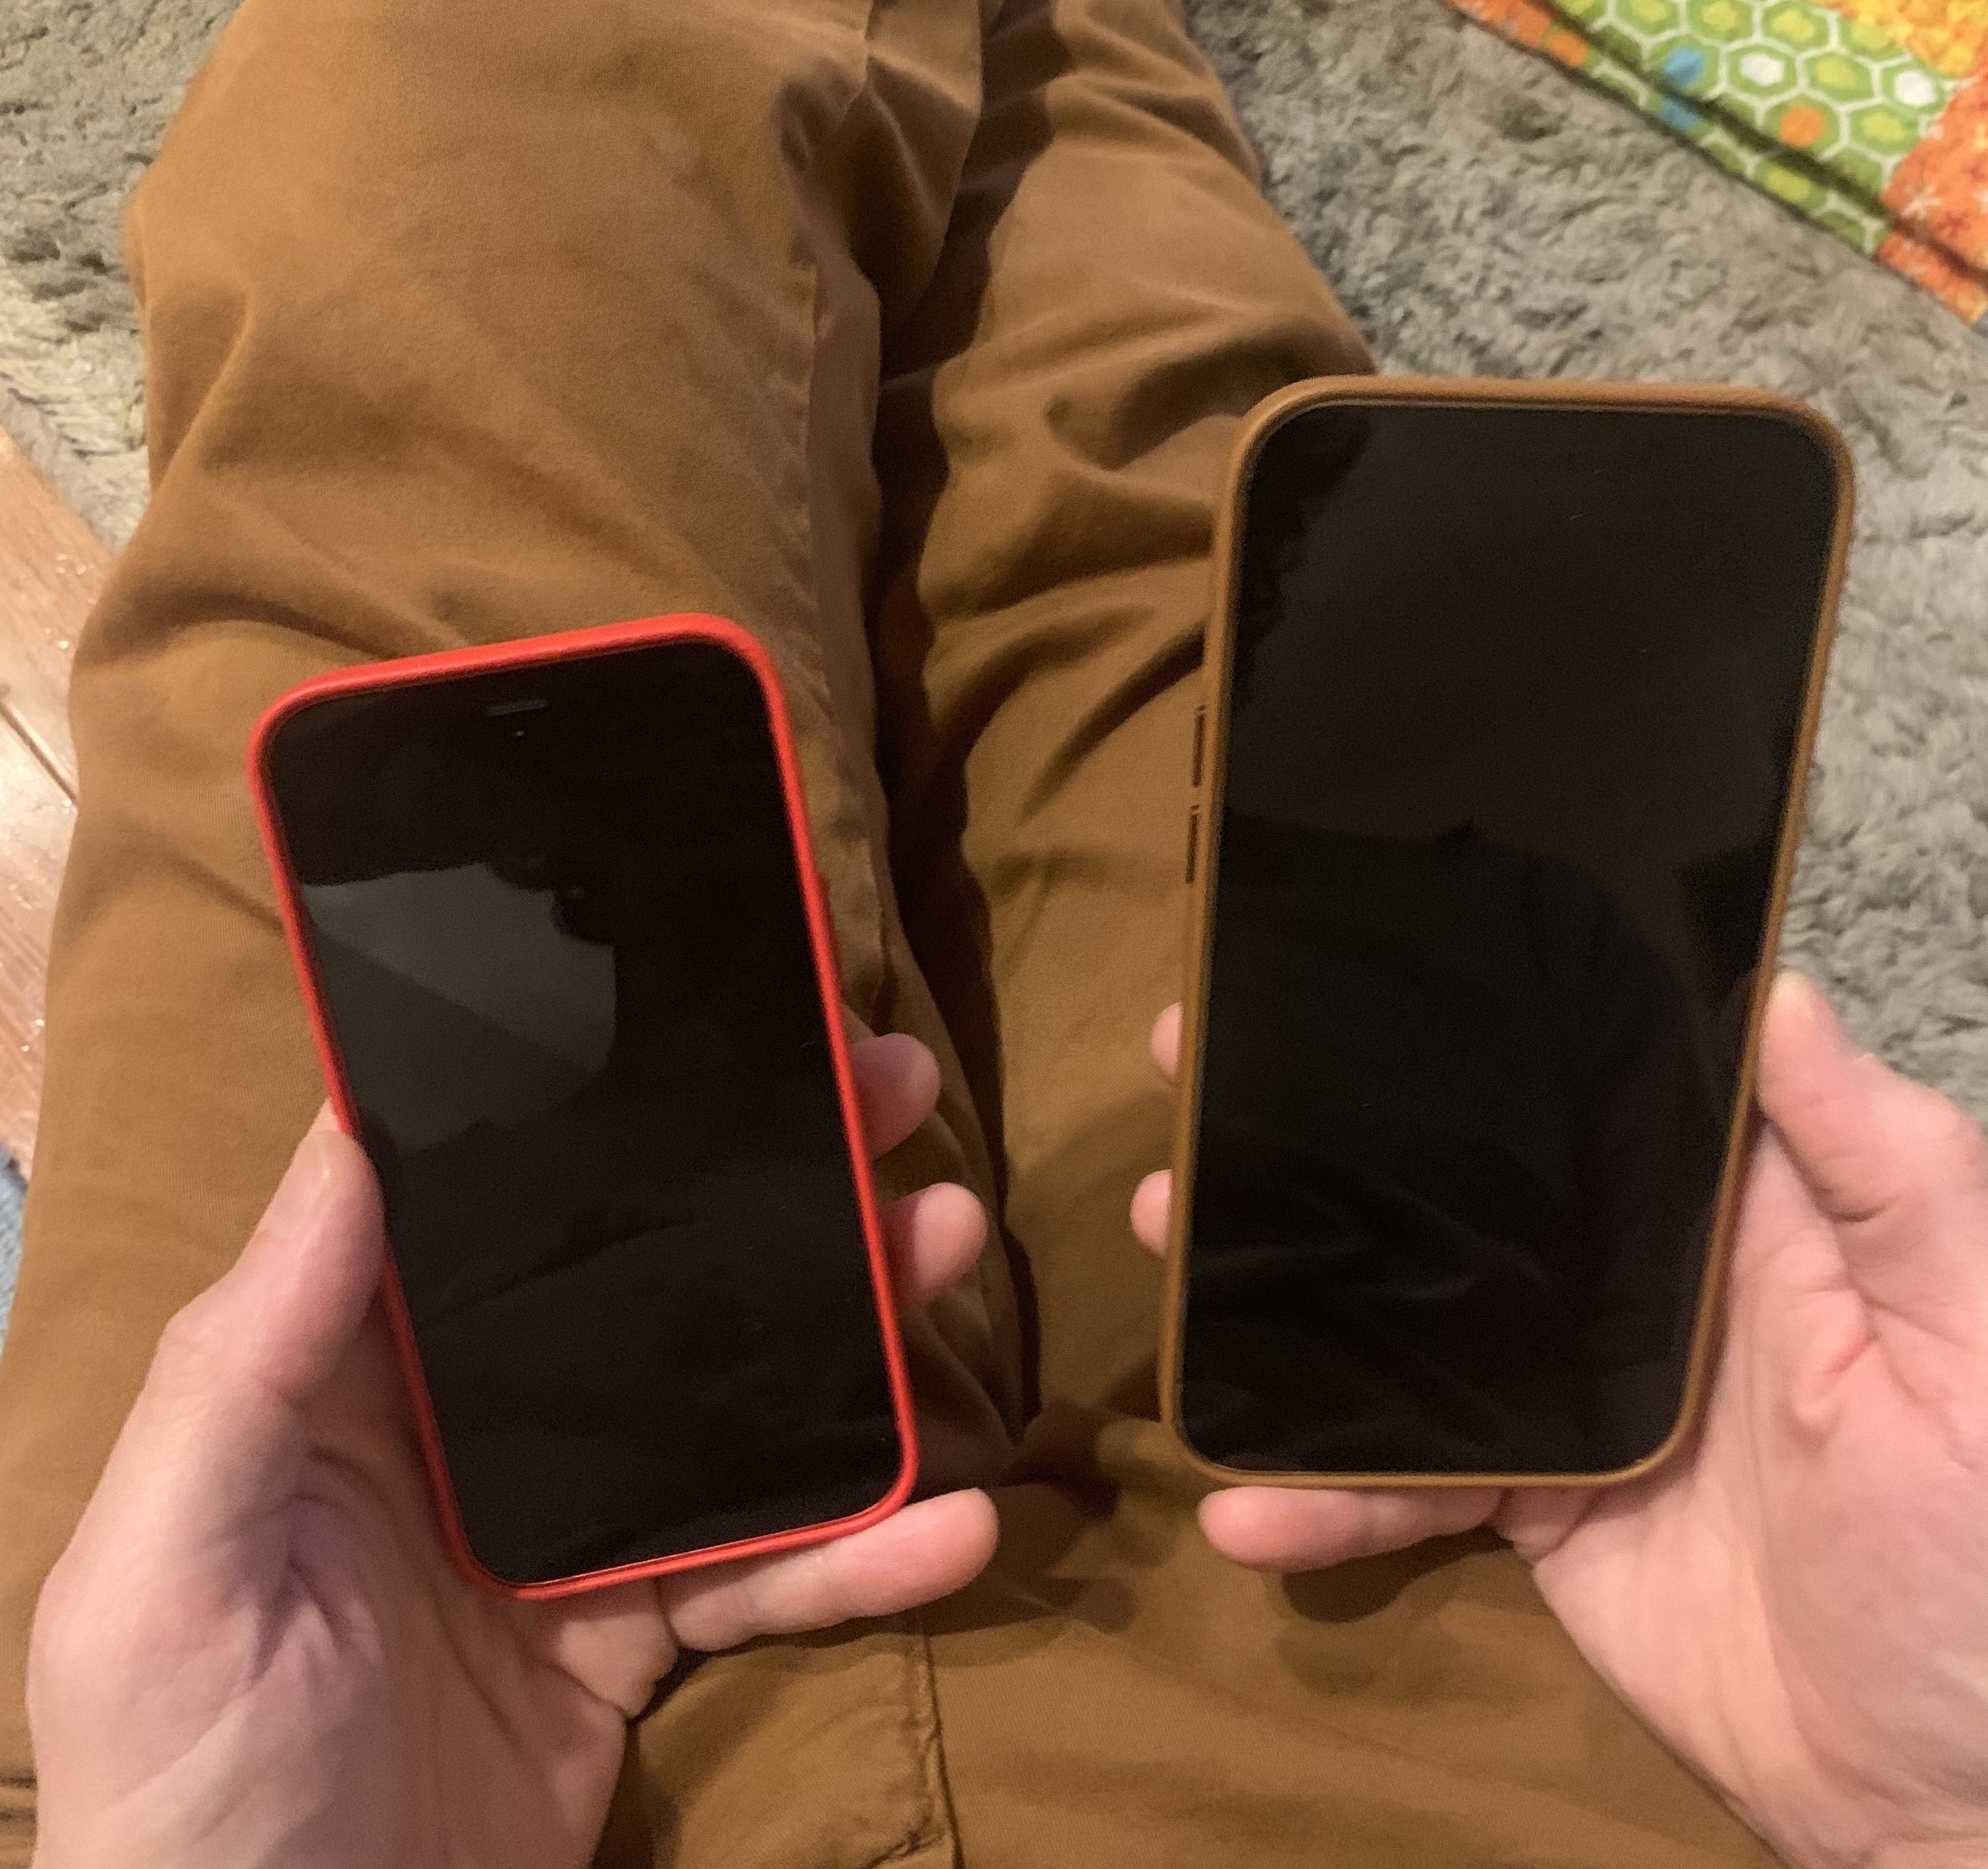 iPhone 12 mini, iPhone 12 Pro Max hands-on: How they compare with the 12  and 12 Pro